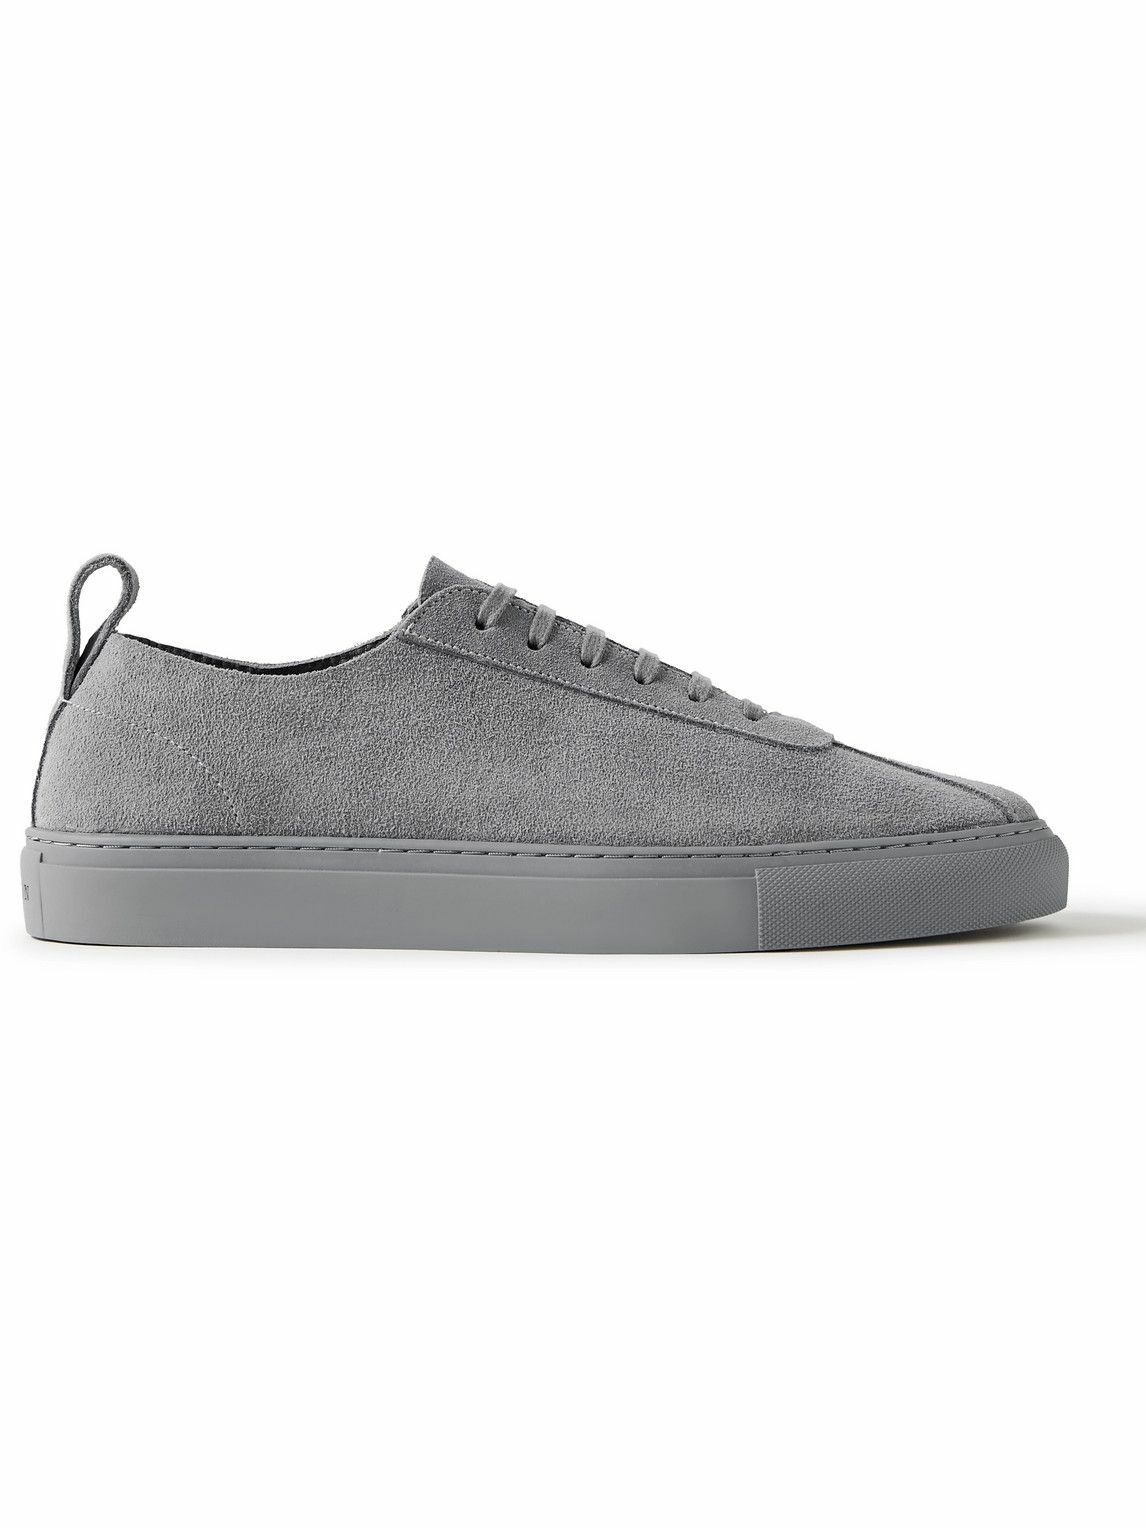 Photo: Grenson - Suede Sneakers - Gray